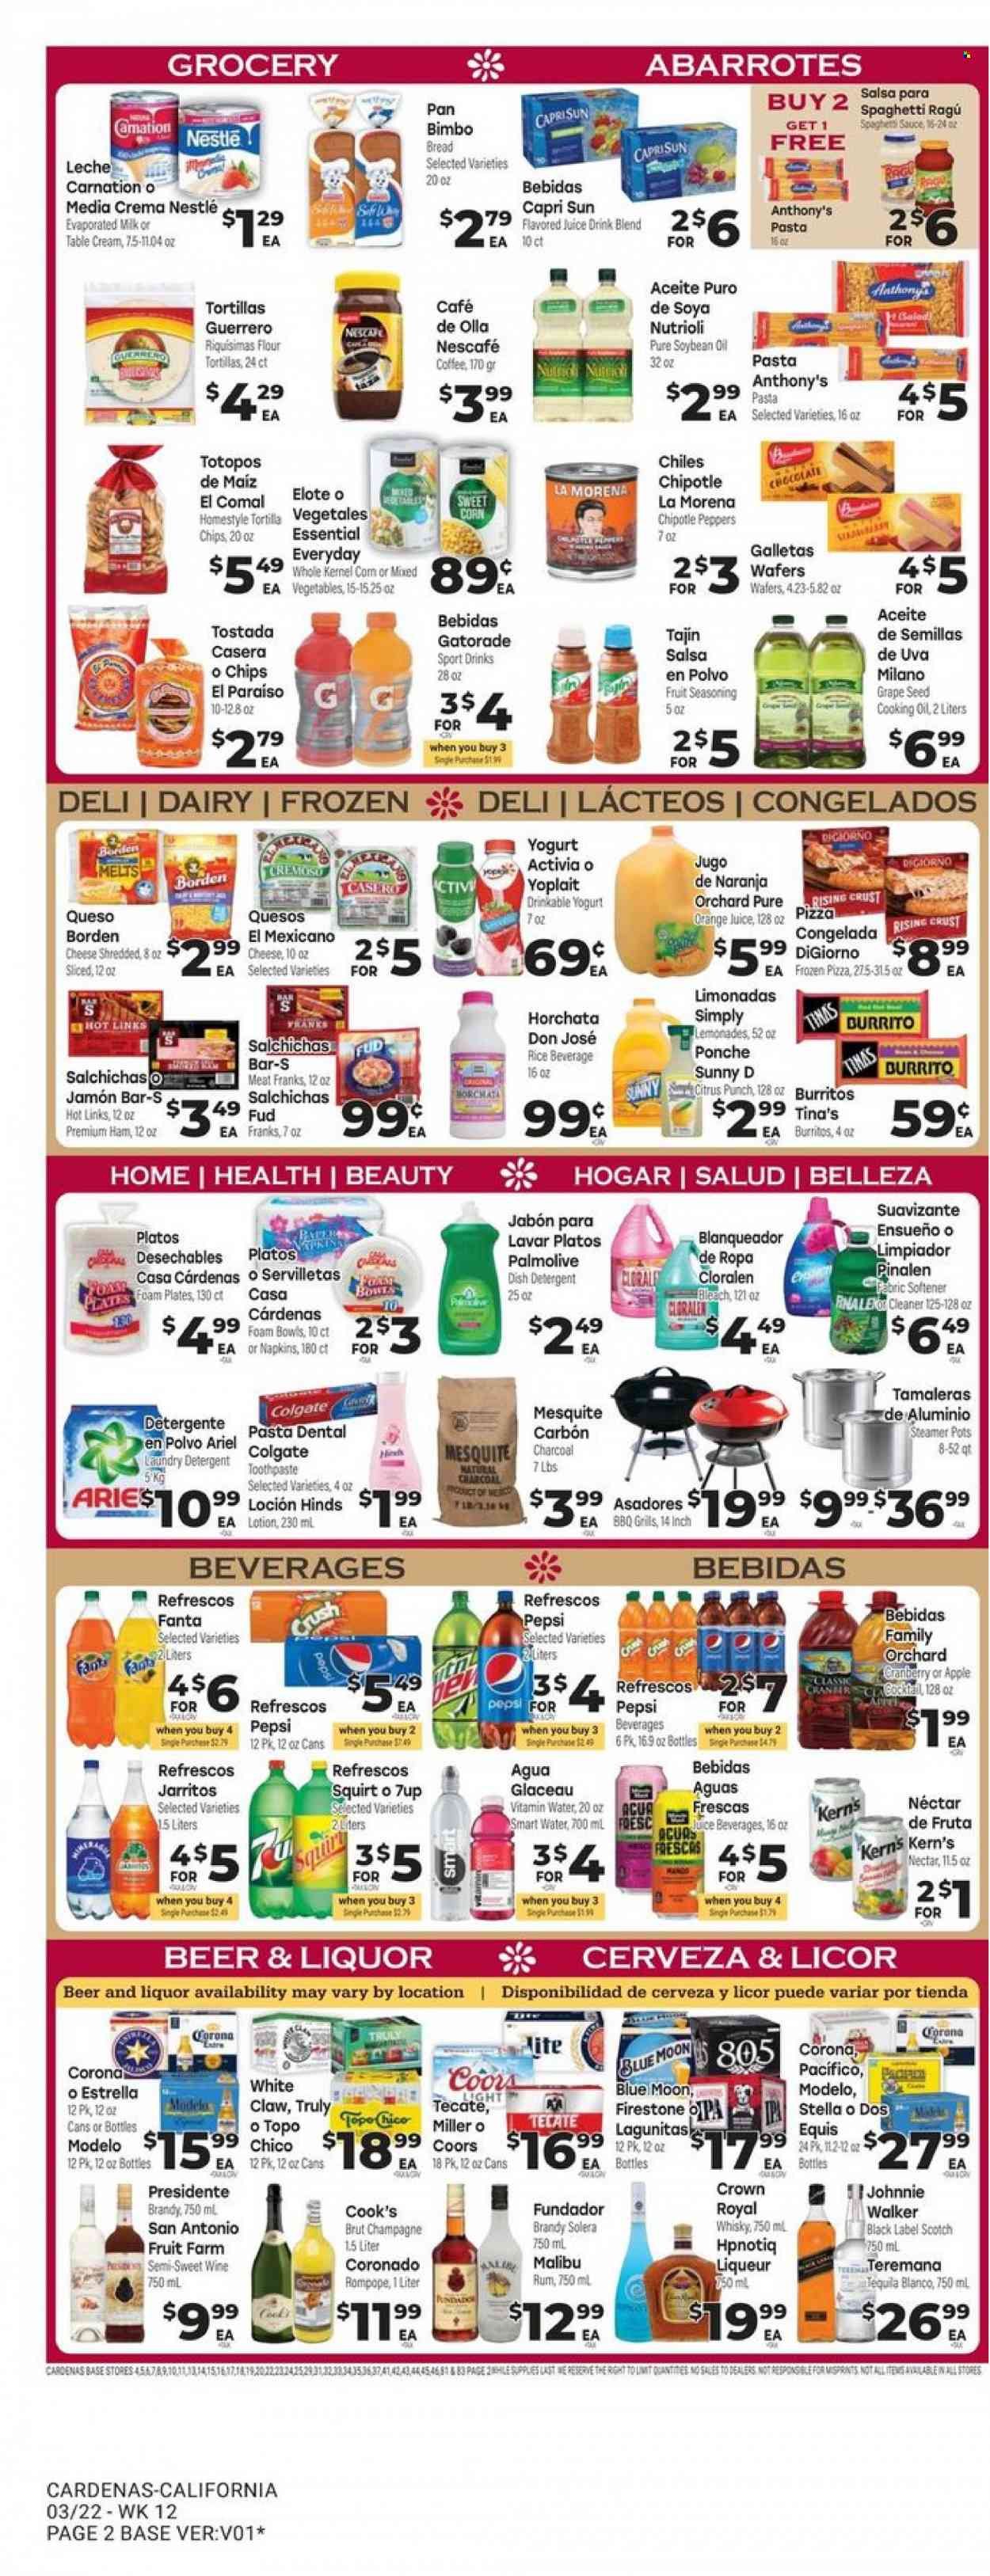 thumbnail - Cardenas Flyer - 03/22/2023 - 03/28/2023 - Sales products - bread, flour tortillas, corn, salad, peppers, spaghetti, pizza, pasta, burrito, spaghetti sauce, ham, yoghurt, Activia, Yoplait, evaporated milk, Nestlé, wafers, chocolate, tortilla chips, rice, spice, Hinds, salsa, ragu, soya oil, oil, cooking oil, fruit jam, Capri Sun, Pepsi, orange juice, juice, Fanta, 7UP, Kern's, Gatorade, Smartwater, vitamin water, water, coffee, Nescafé, champagne, brandy, liqueur, rum, tequila, punch, liquor, Johnnie Walker, Malibu, White Claw, TRULY, whisky, beer, Corona Extra, Miller, Modelo, Estrella, napkins, detergent, cleaner, bleach, fabric softener, Ariel, laundry detergent, dishwasher cleaner, Palmolive, Colgate, toothpaste, body lotion, plate, pot, pan, foam plates, Coors, Dos Equis, Blue Moon. Page 2.